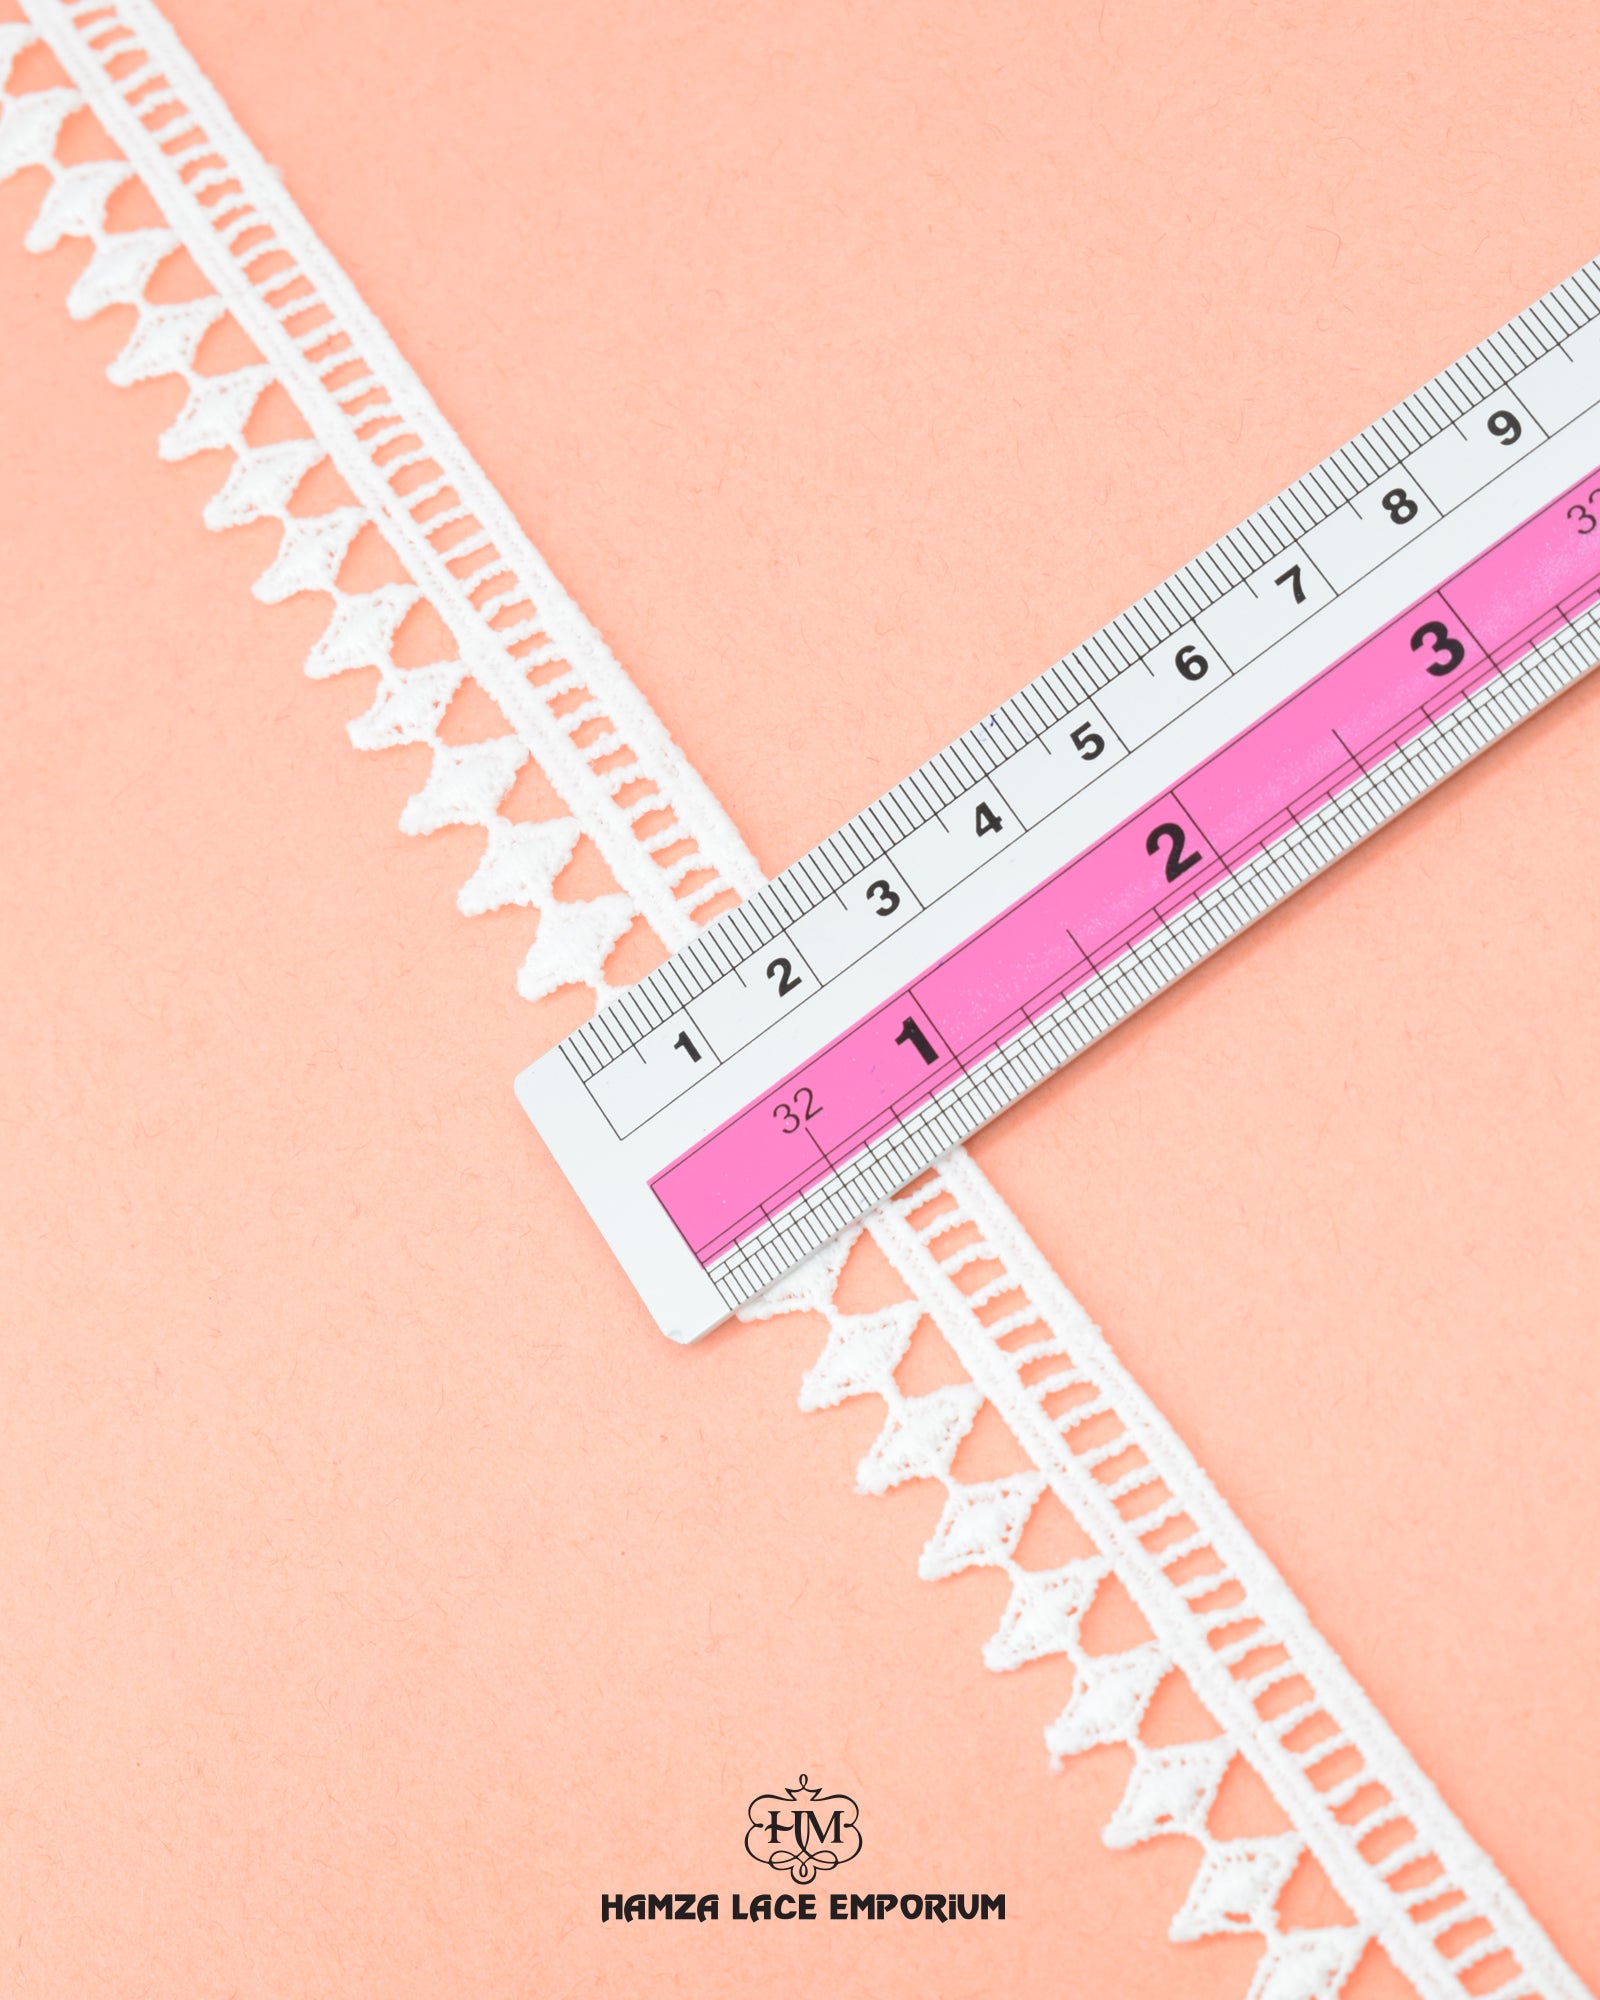 Size of the 'Edging Triangle Lace 22968' is shown as '1' inch with the help of a ruler